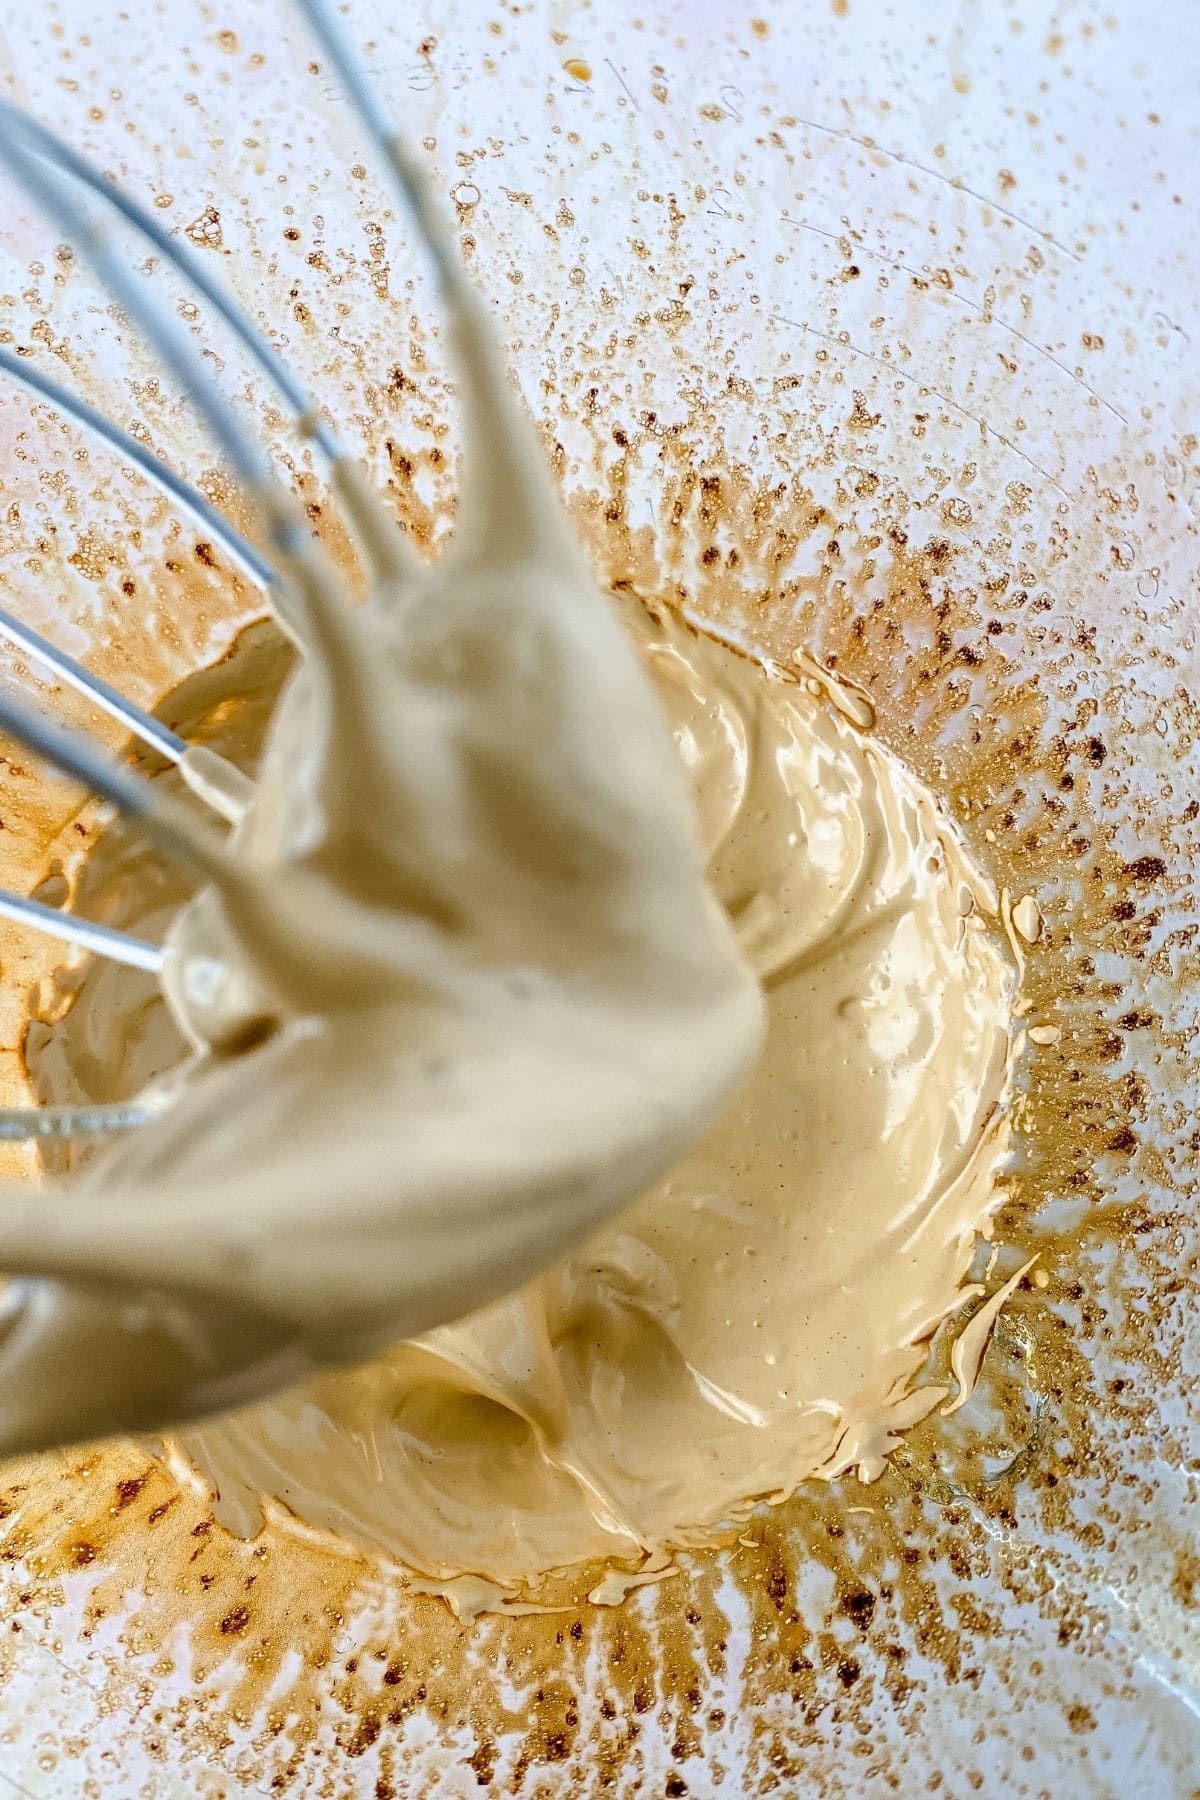 whipped coffee on whisk